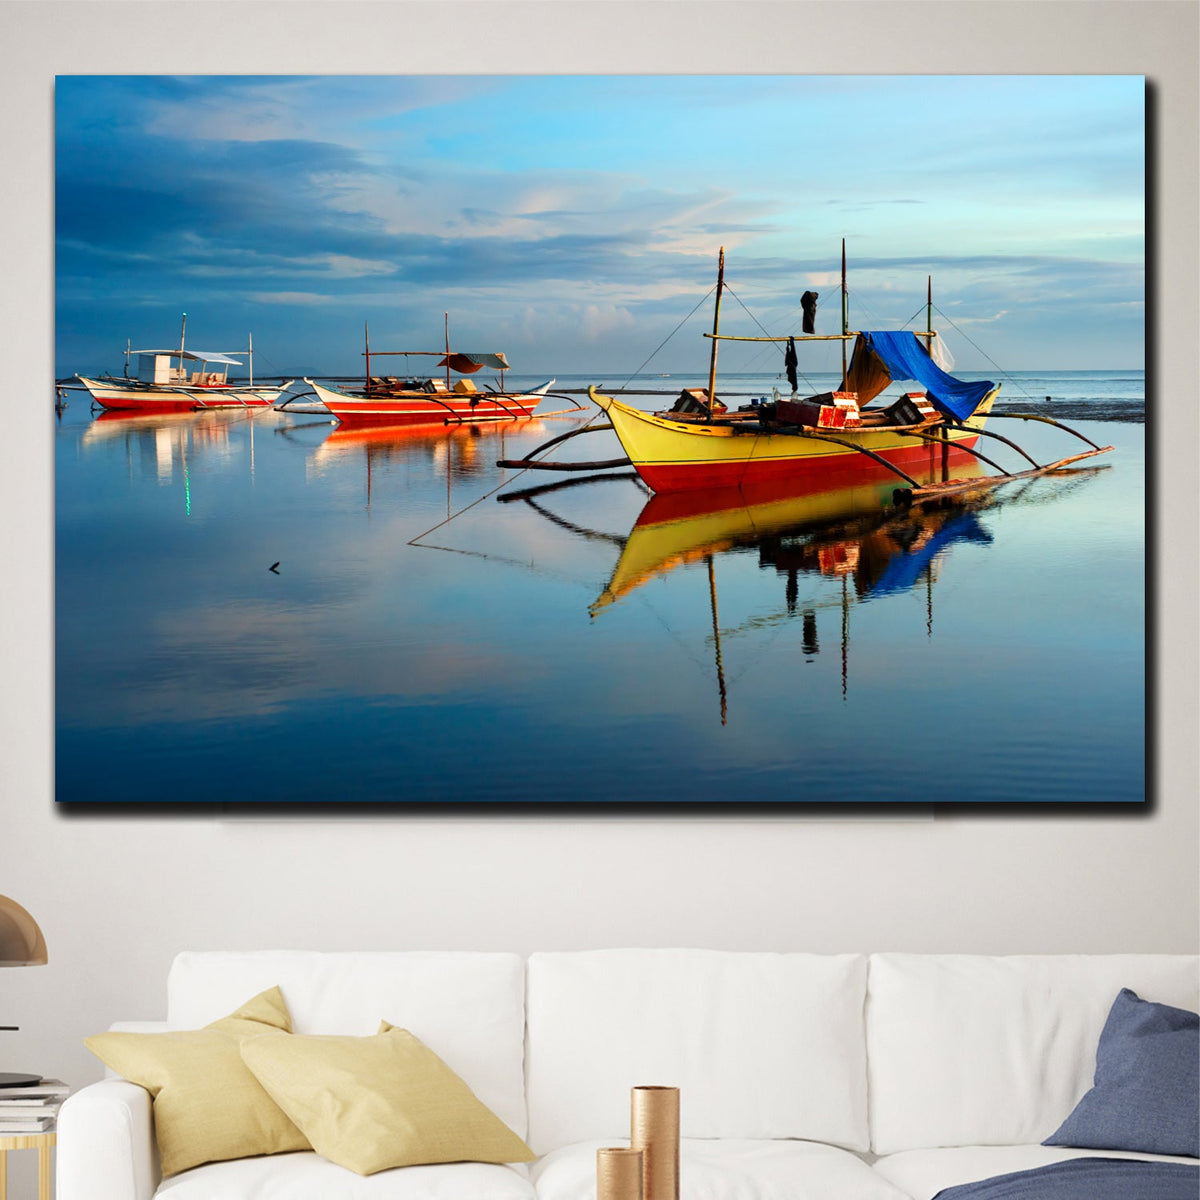 https://cdn.shopify.com/s/files/1/0387/9986/8044/products/BoatsintheWaterCanvasArtprintStretched-2.jpg